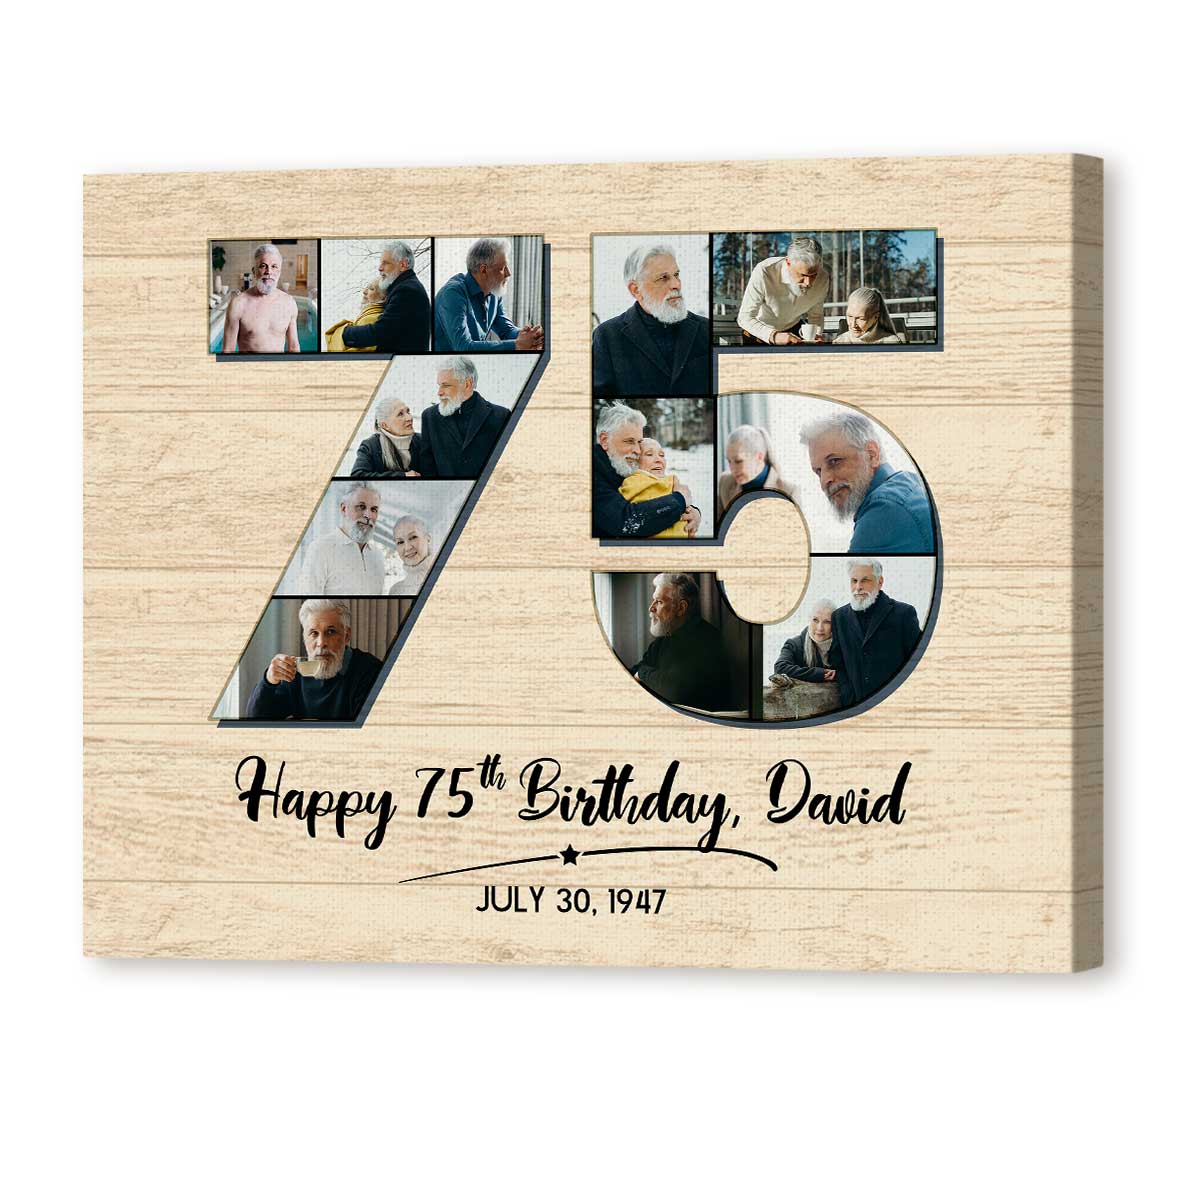 Eslygoily 75th Birthday Gifts for Women, Gifts for Women, Gifts for mom,  Gifts for dad, Valentines Day Decor, I Love You Gifts for Her, Ideas, Its a  Wonderful Life Movie, Throw Blanket